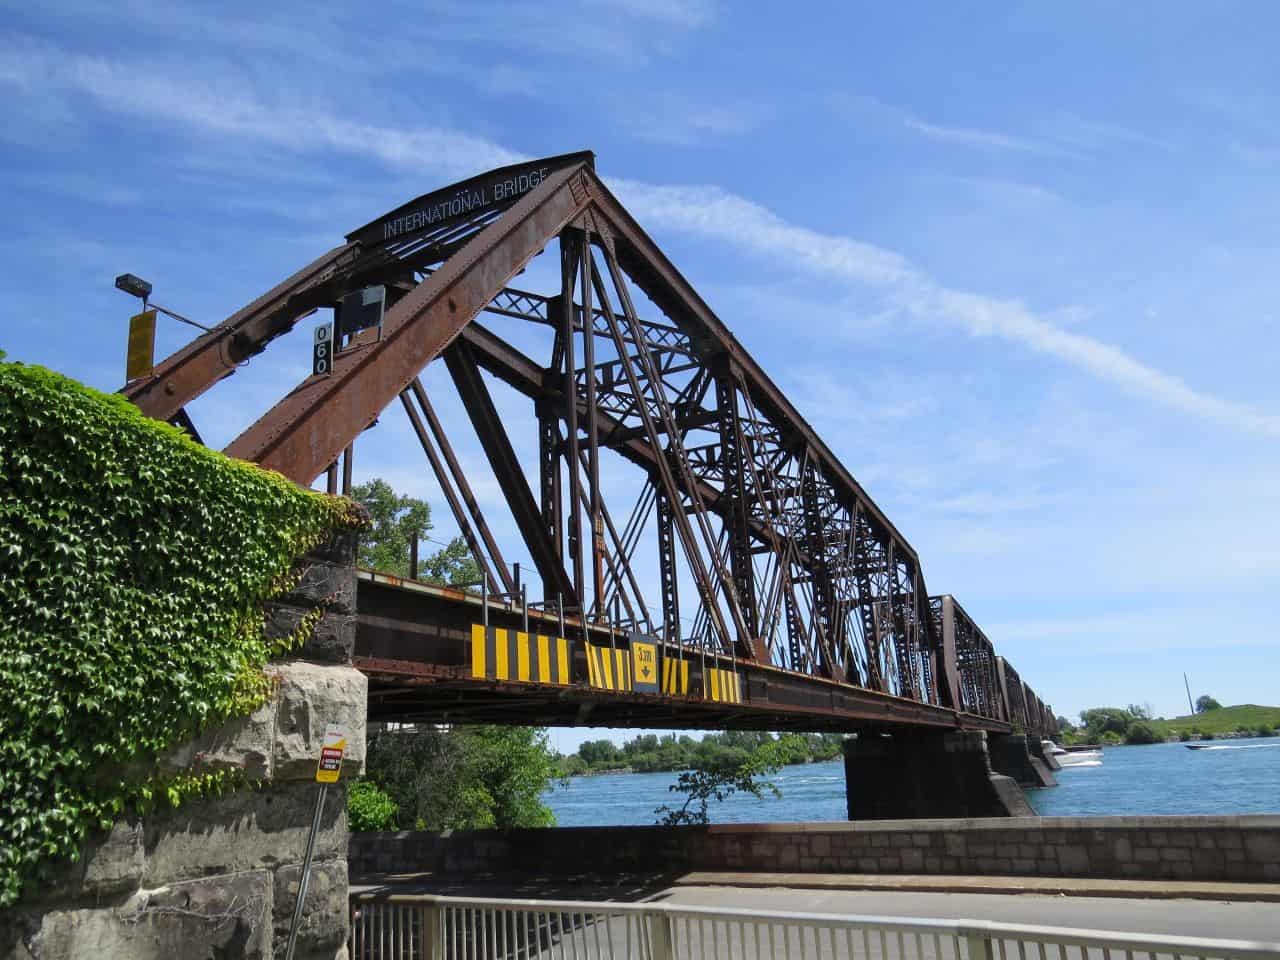 The Niagara River Recreation Trail for hikers and cyclists traces the Niagara River along the Canada-US border